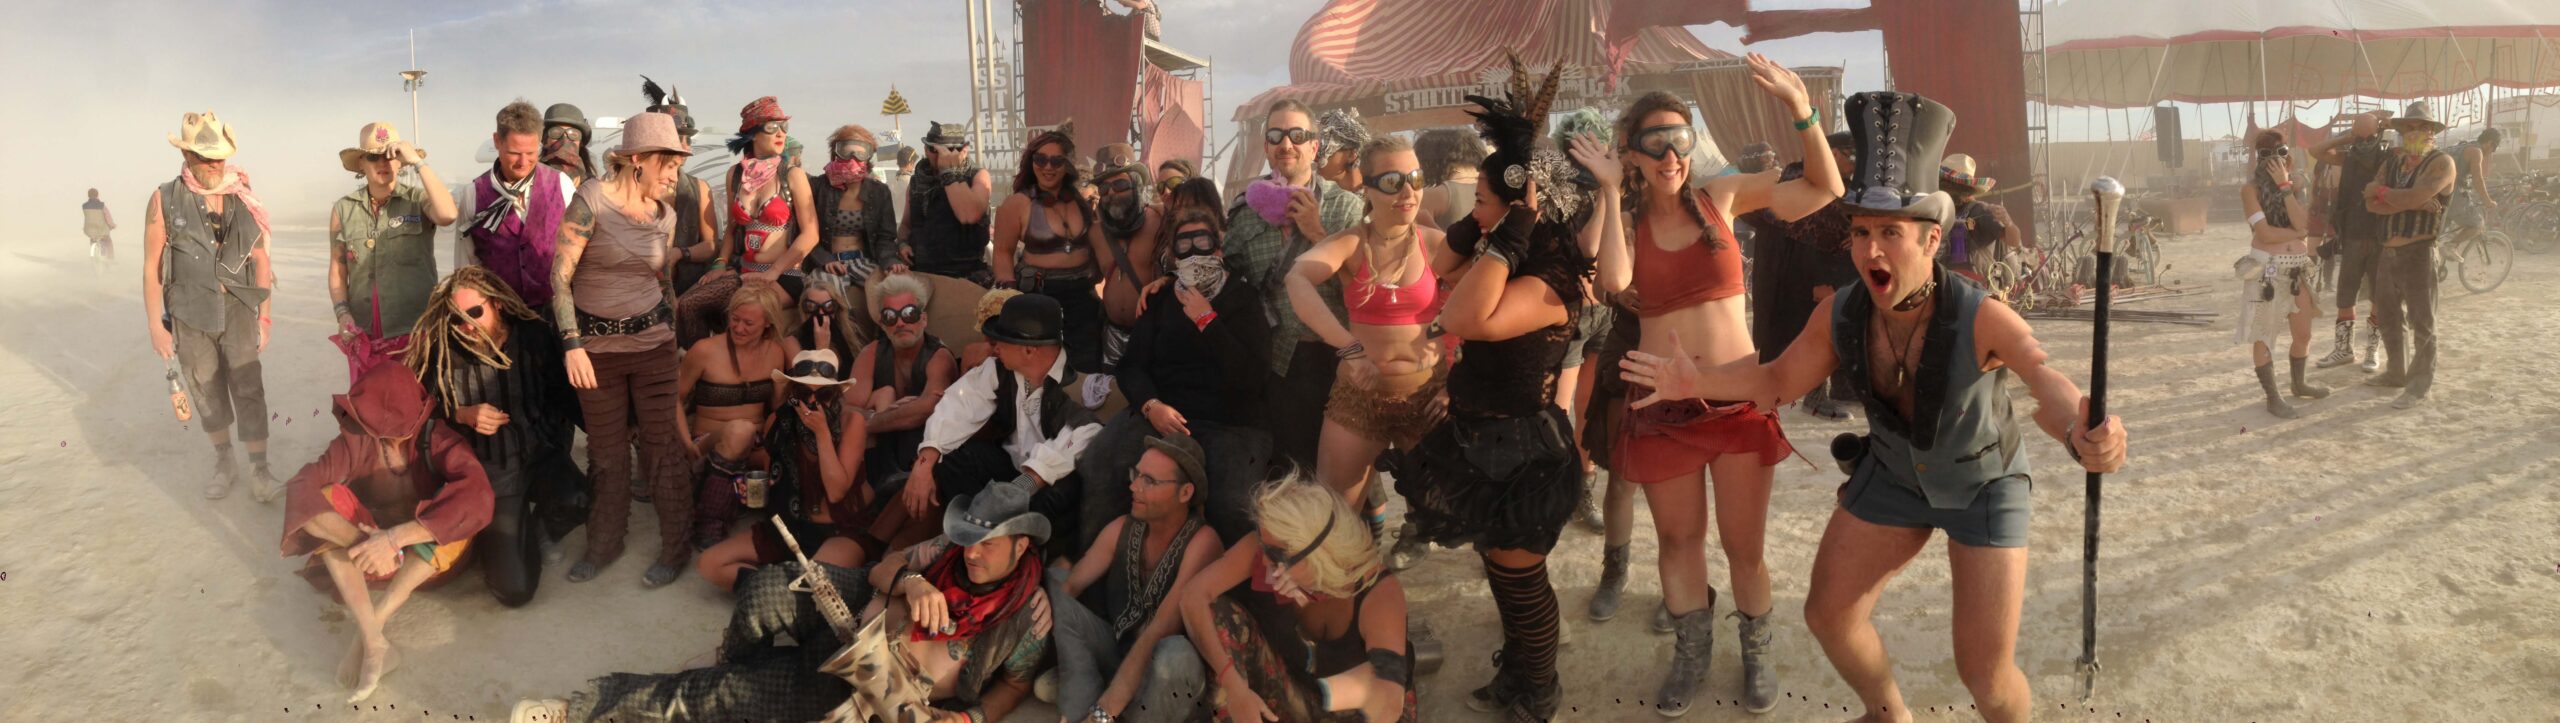 Red Nose District at Burning Man - Photo by Tom Shalvarjian